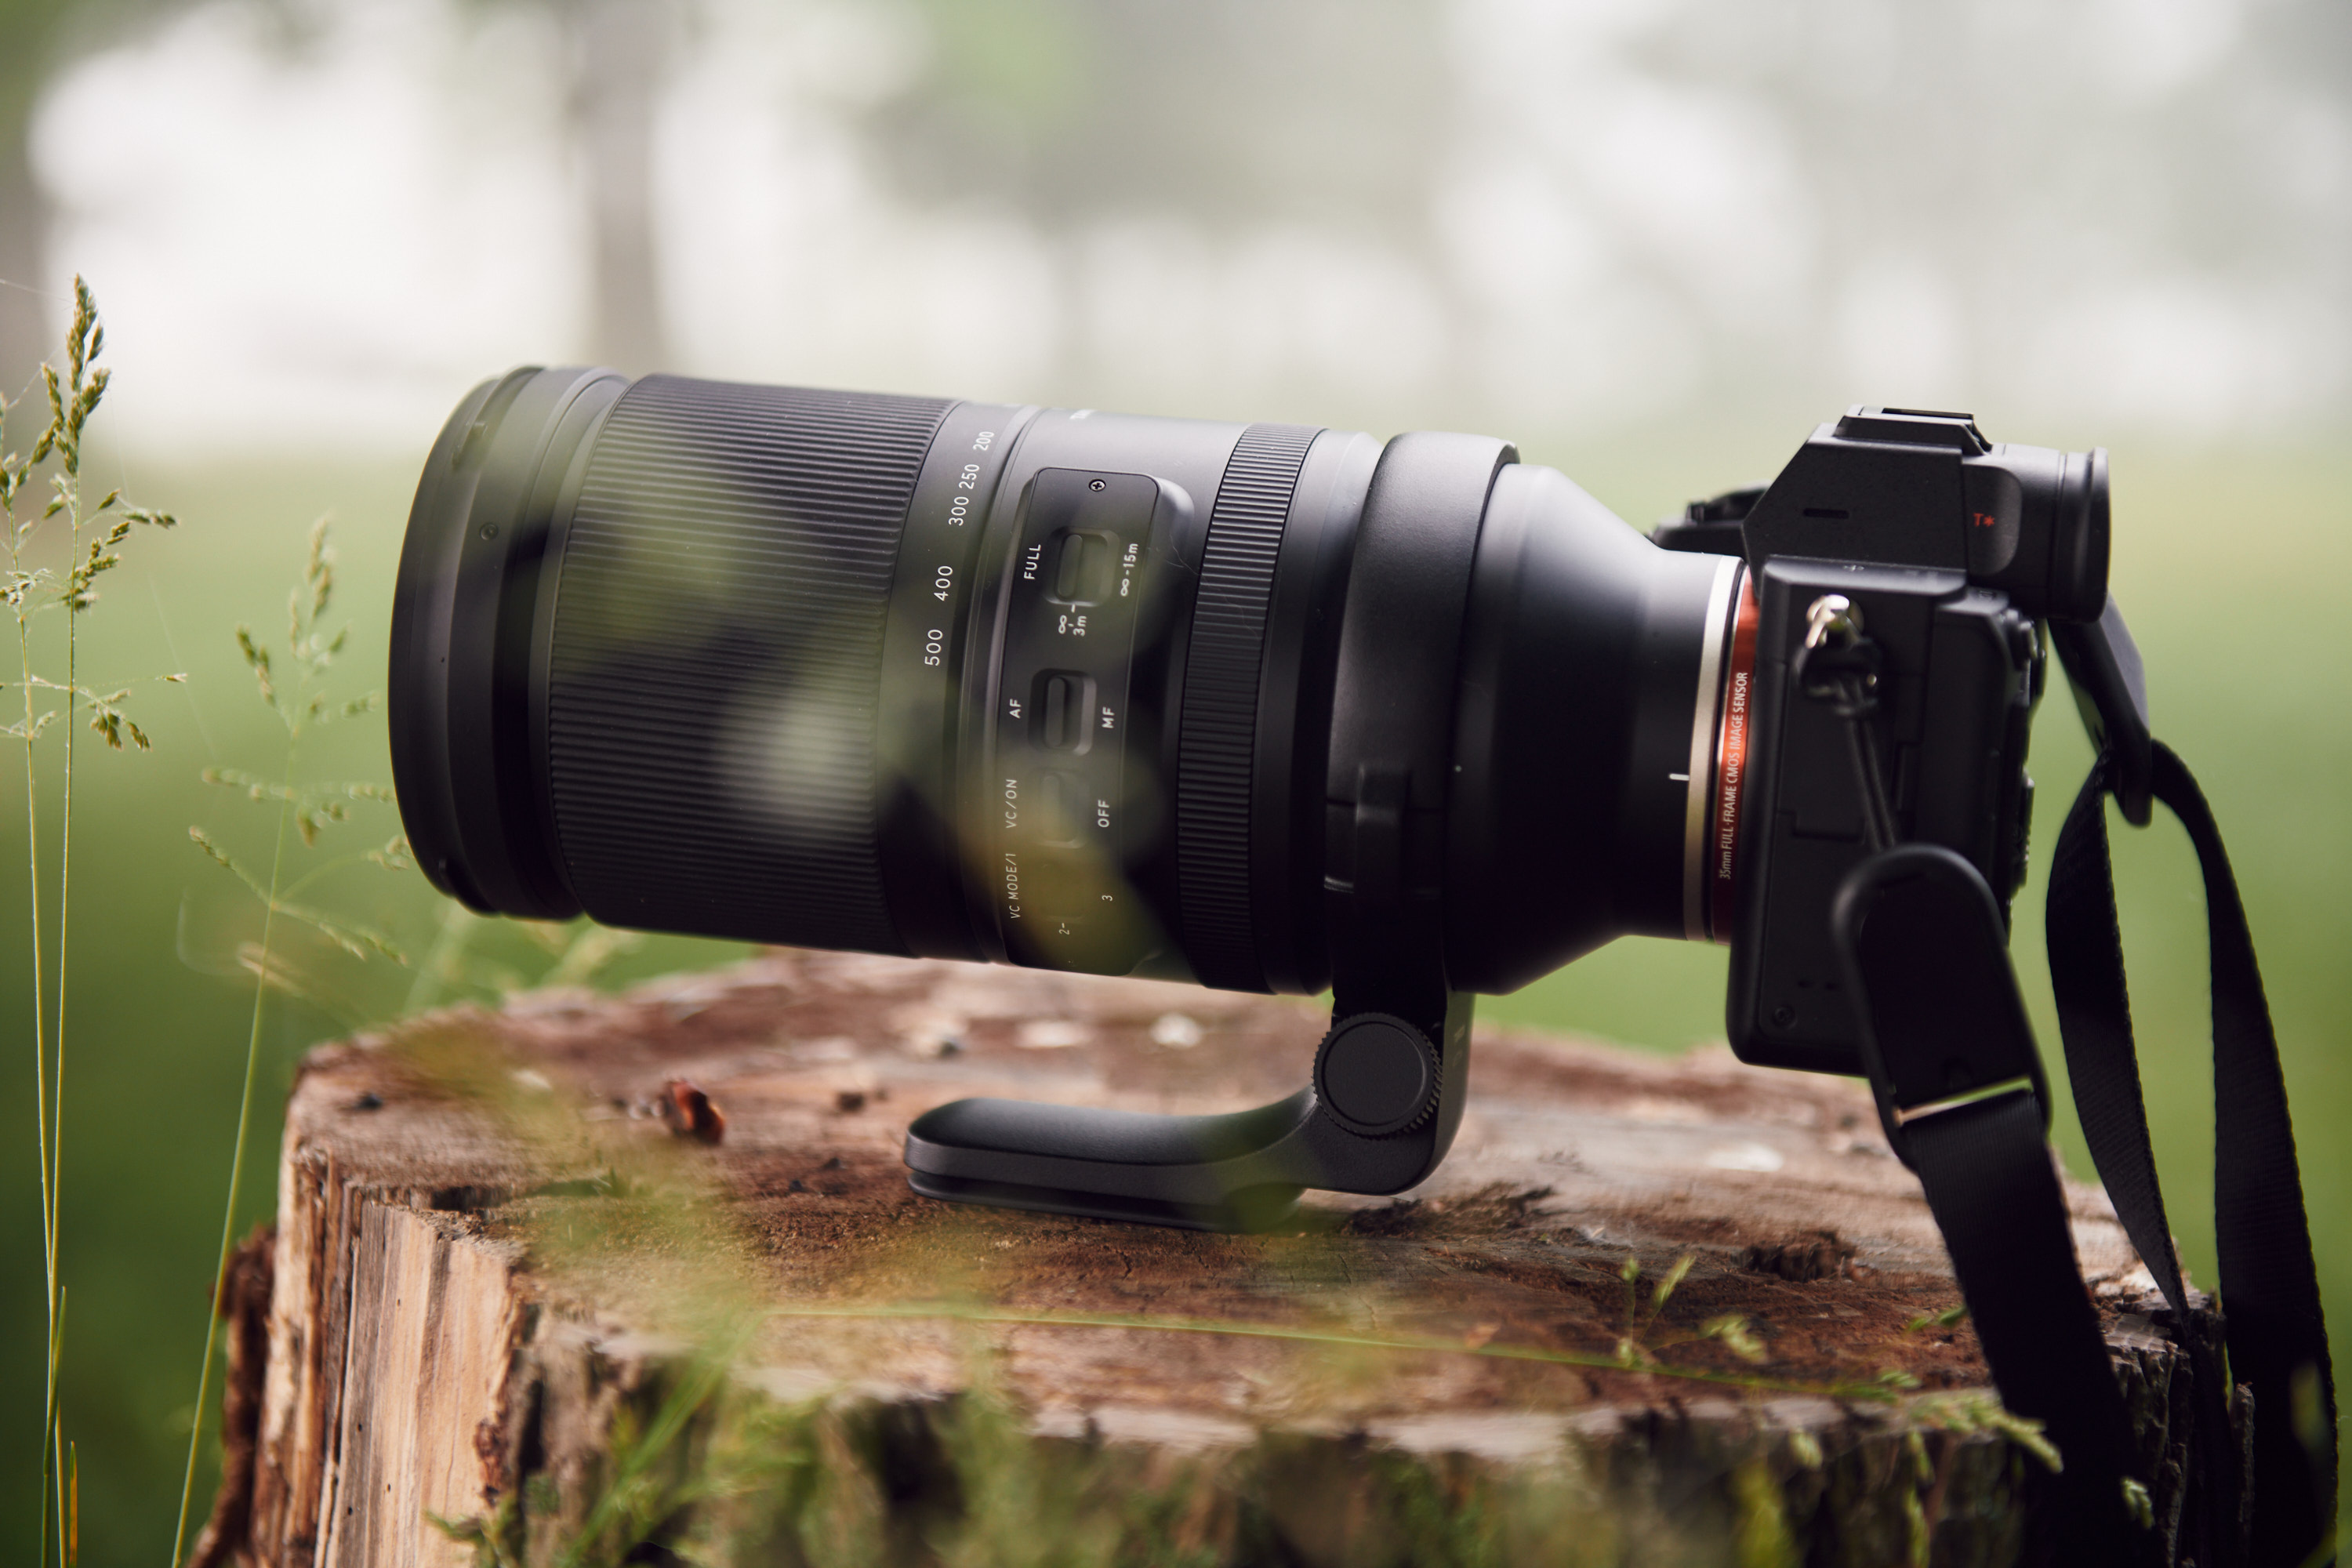 Grab One of These Weather Resistant Lenses for the Tamron Flash Sale!